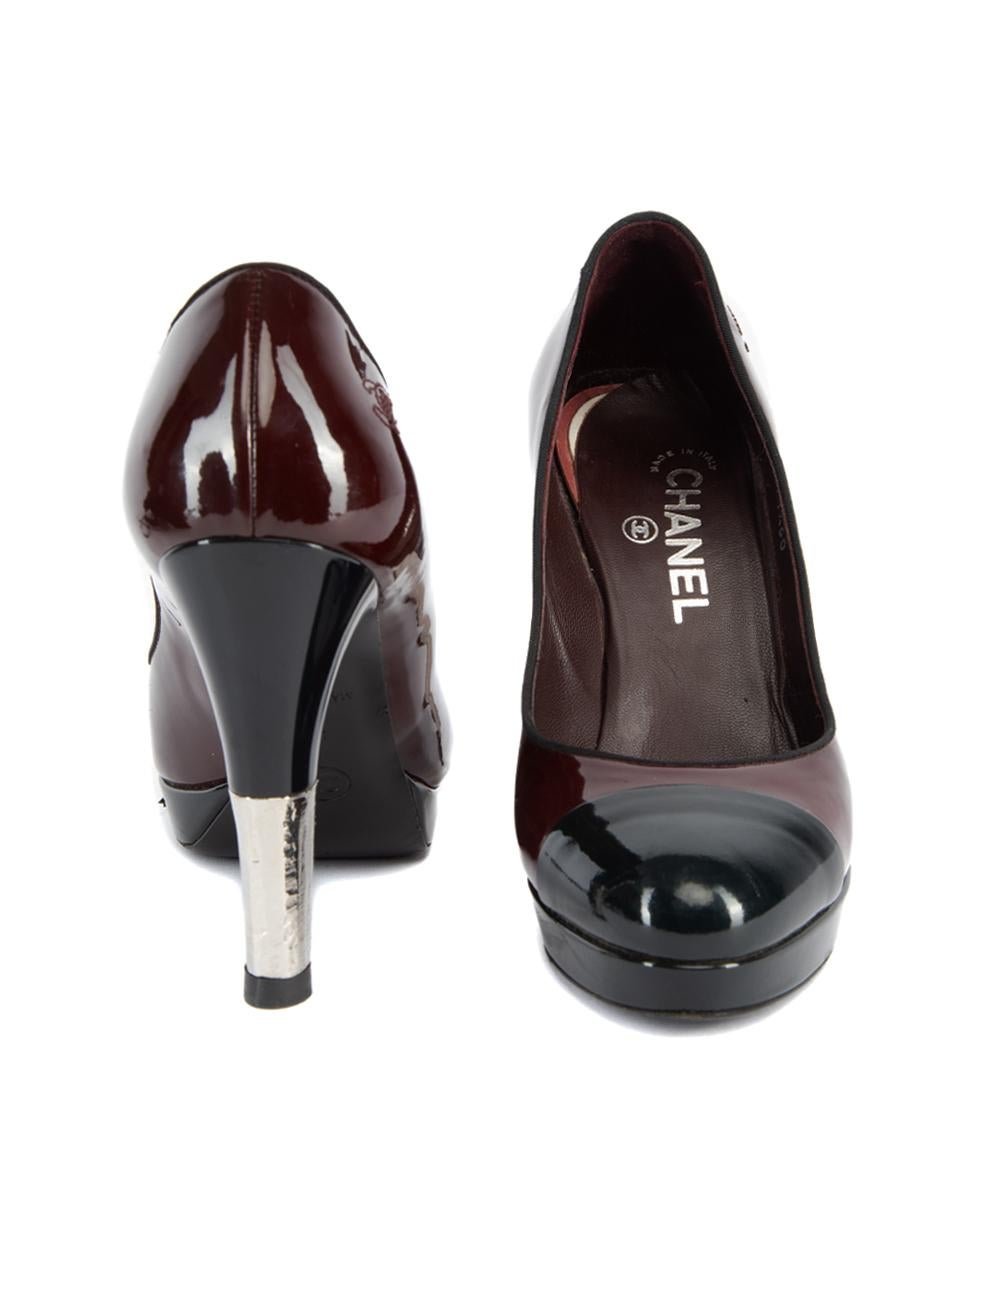 Chanel Women's Burgundy Patent Leather Metal Accent Heel In Excellent Condition For Sale In London, GB